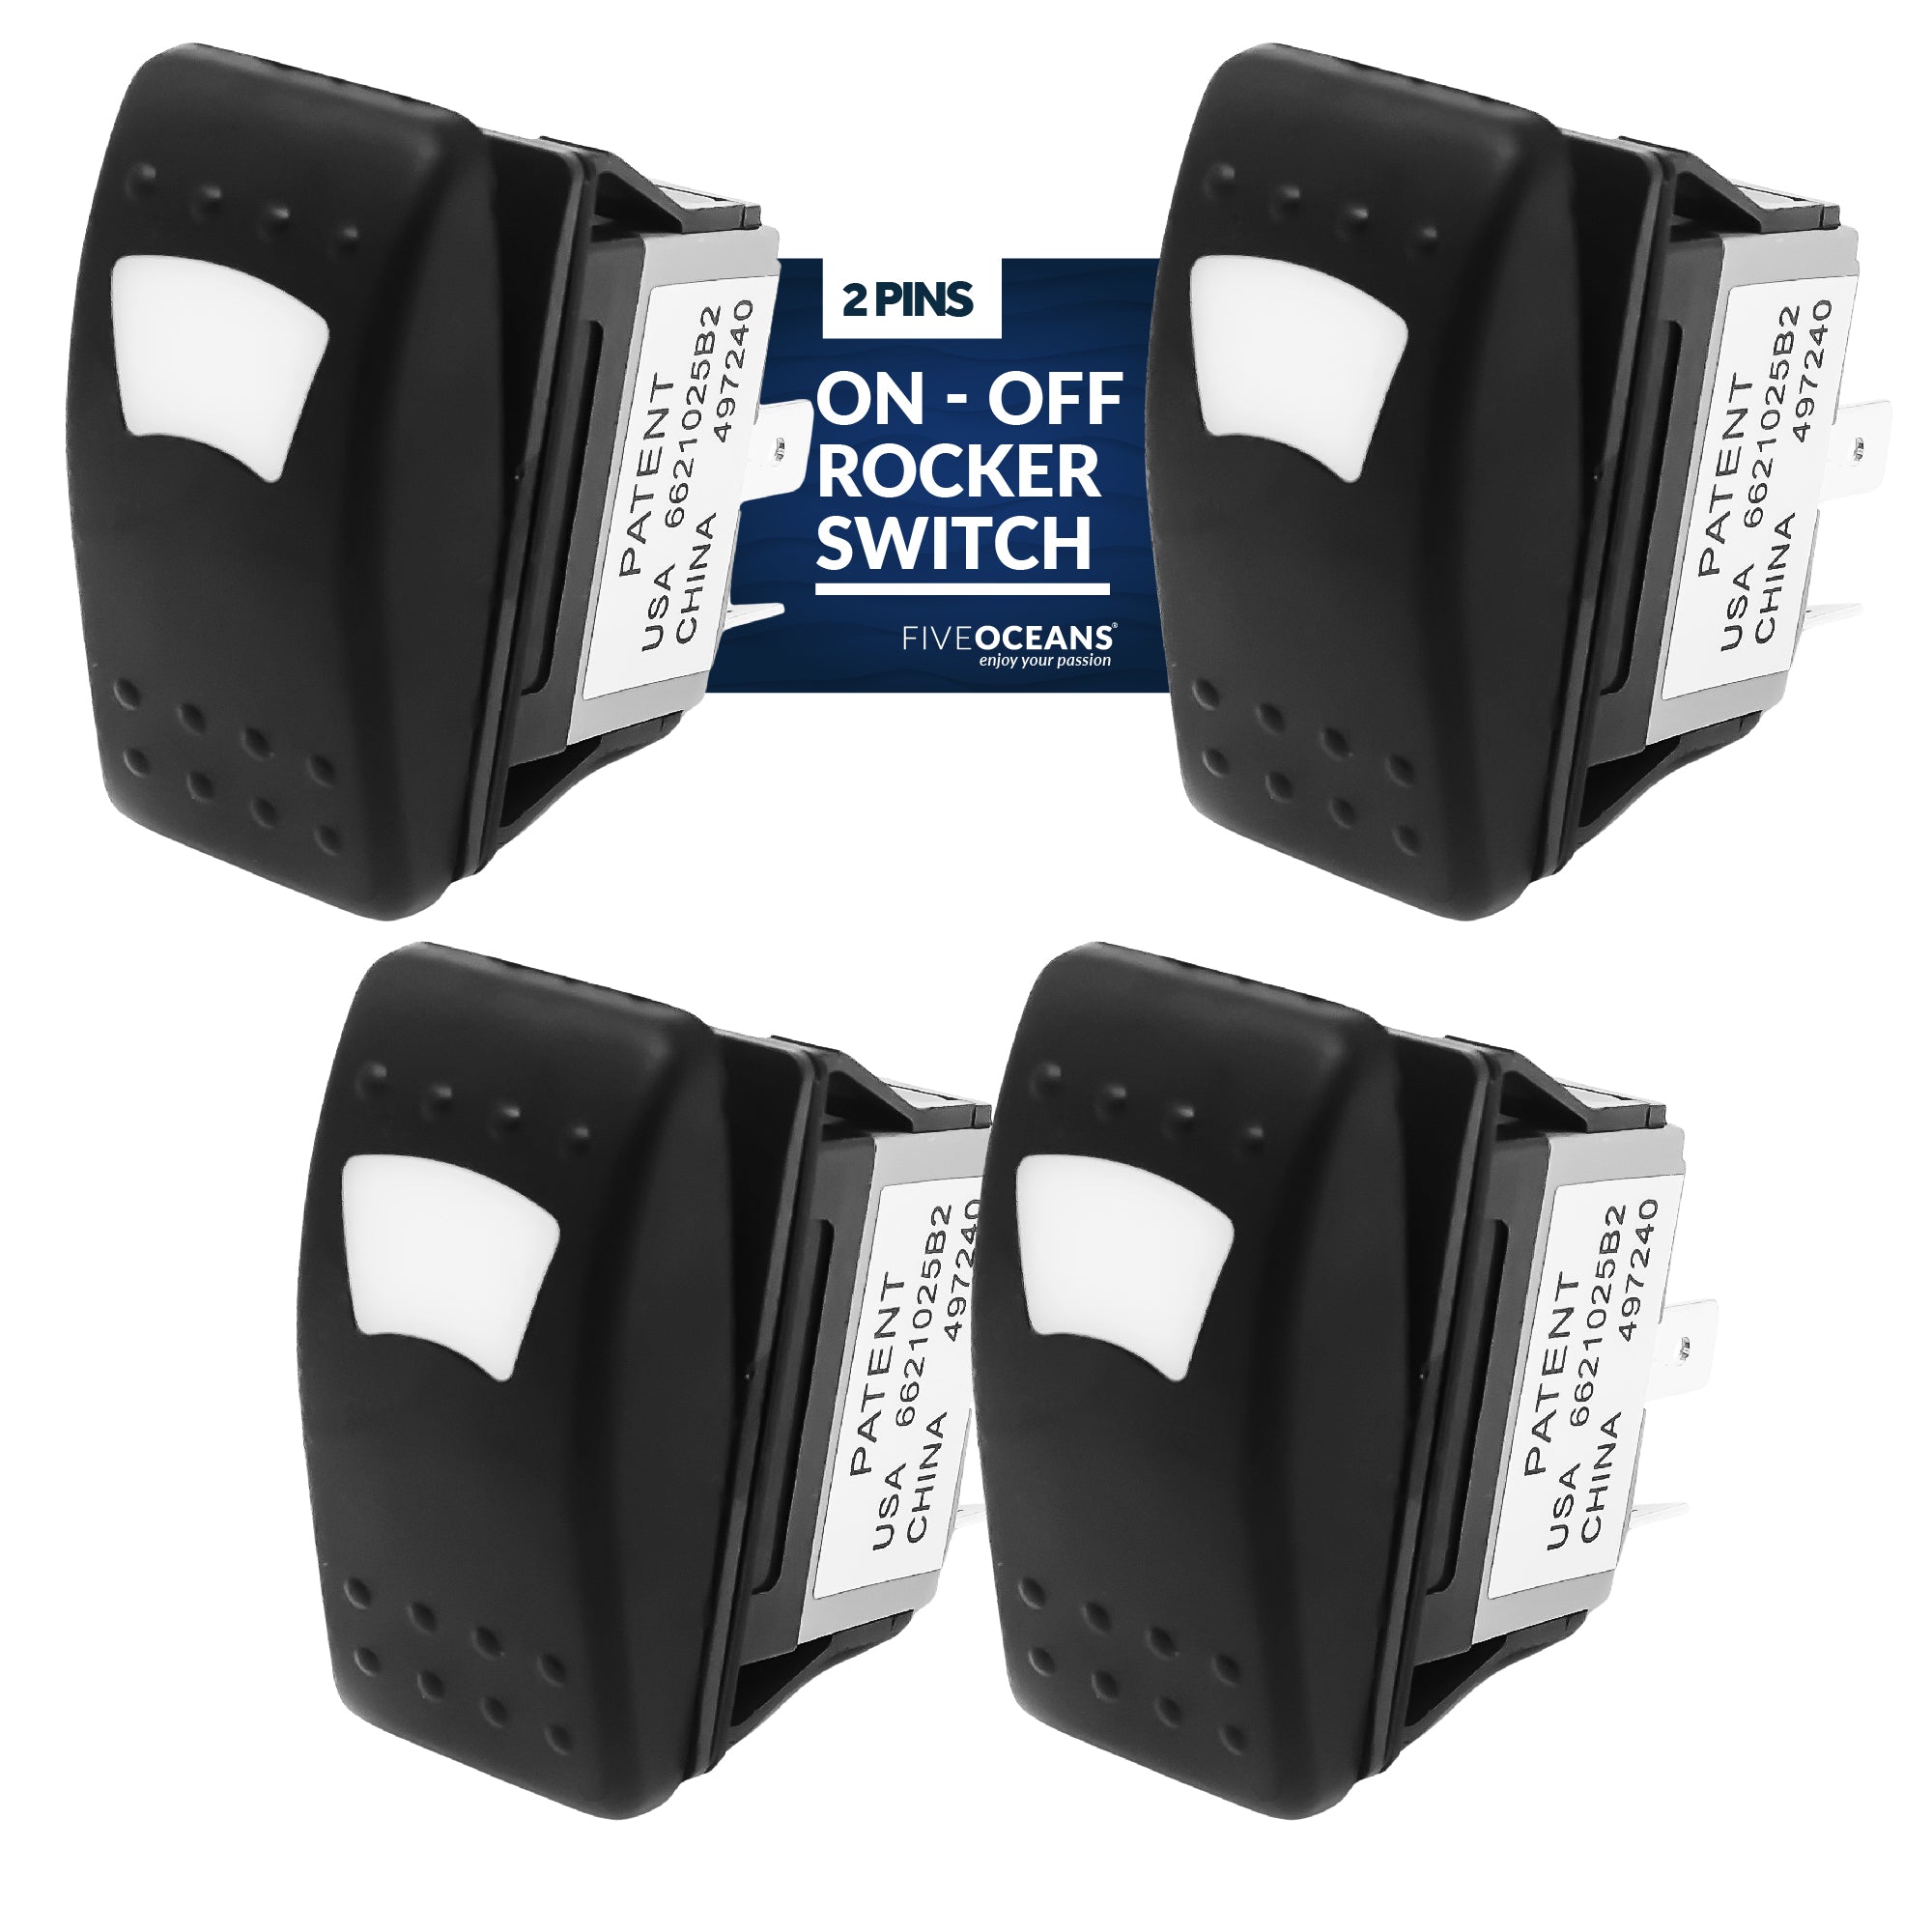 On-Off LED Illuminated Rocker Switch 2 Pins with LED (4 Pack) FO1526-M4